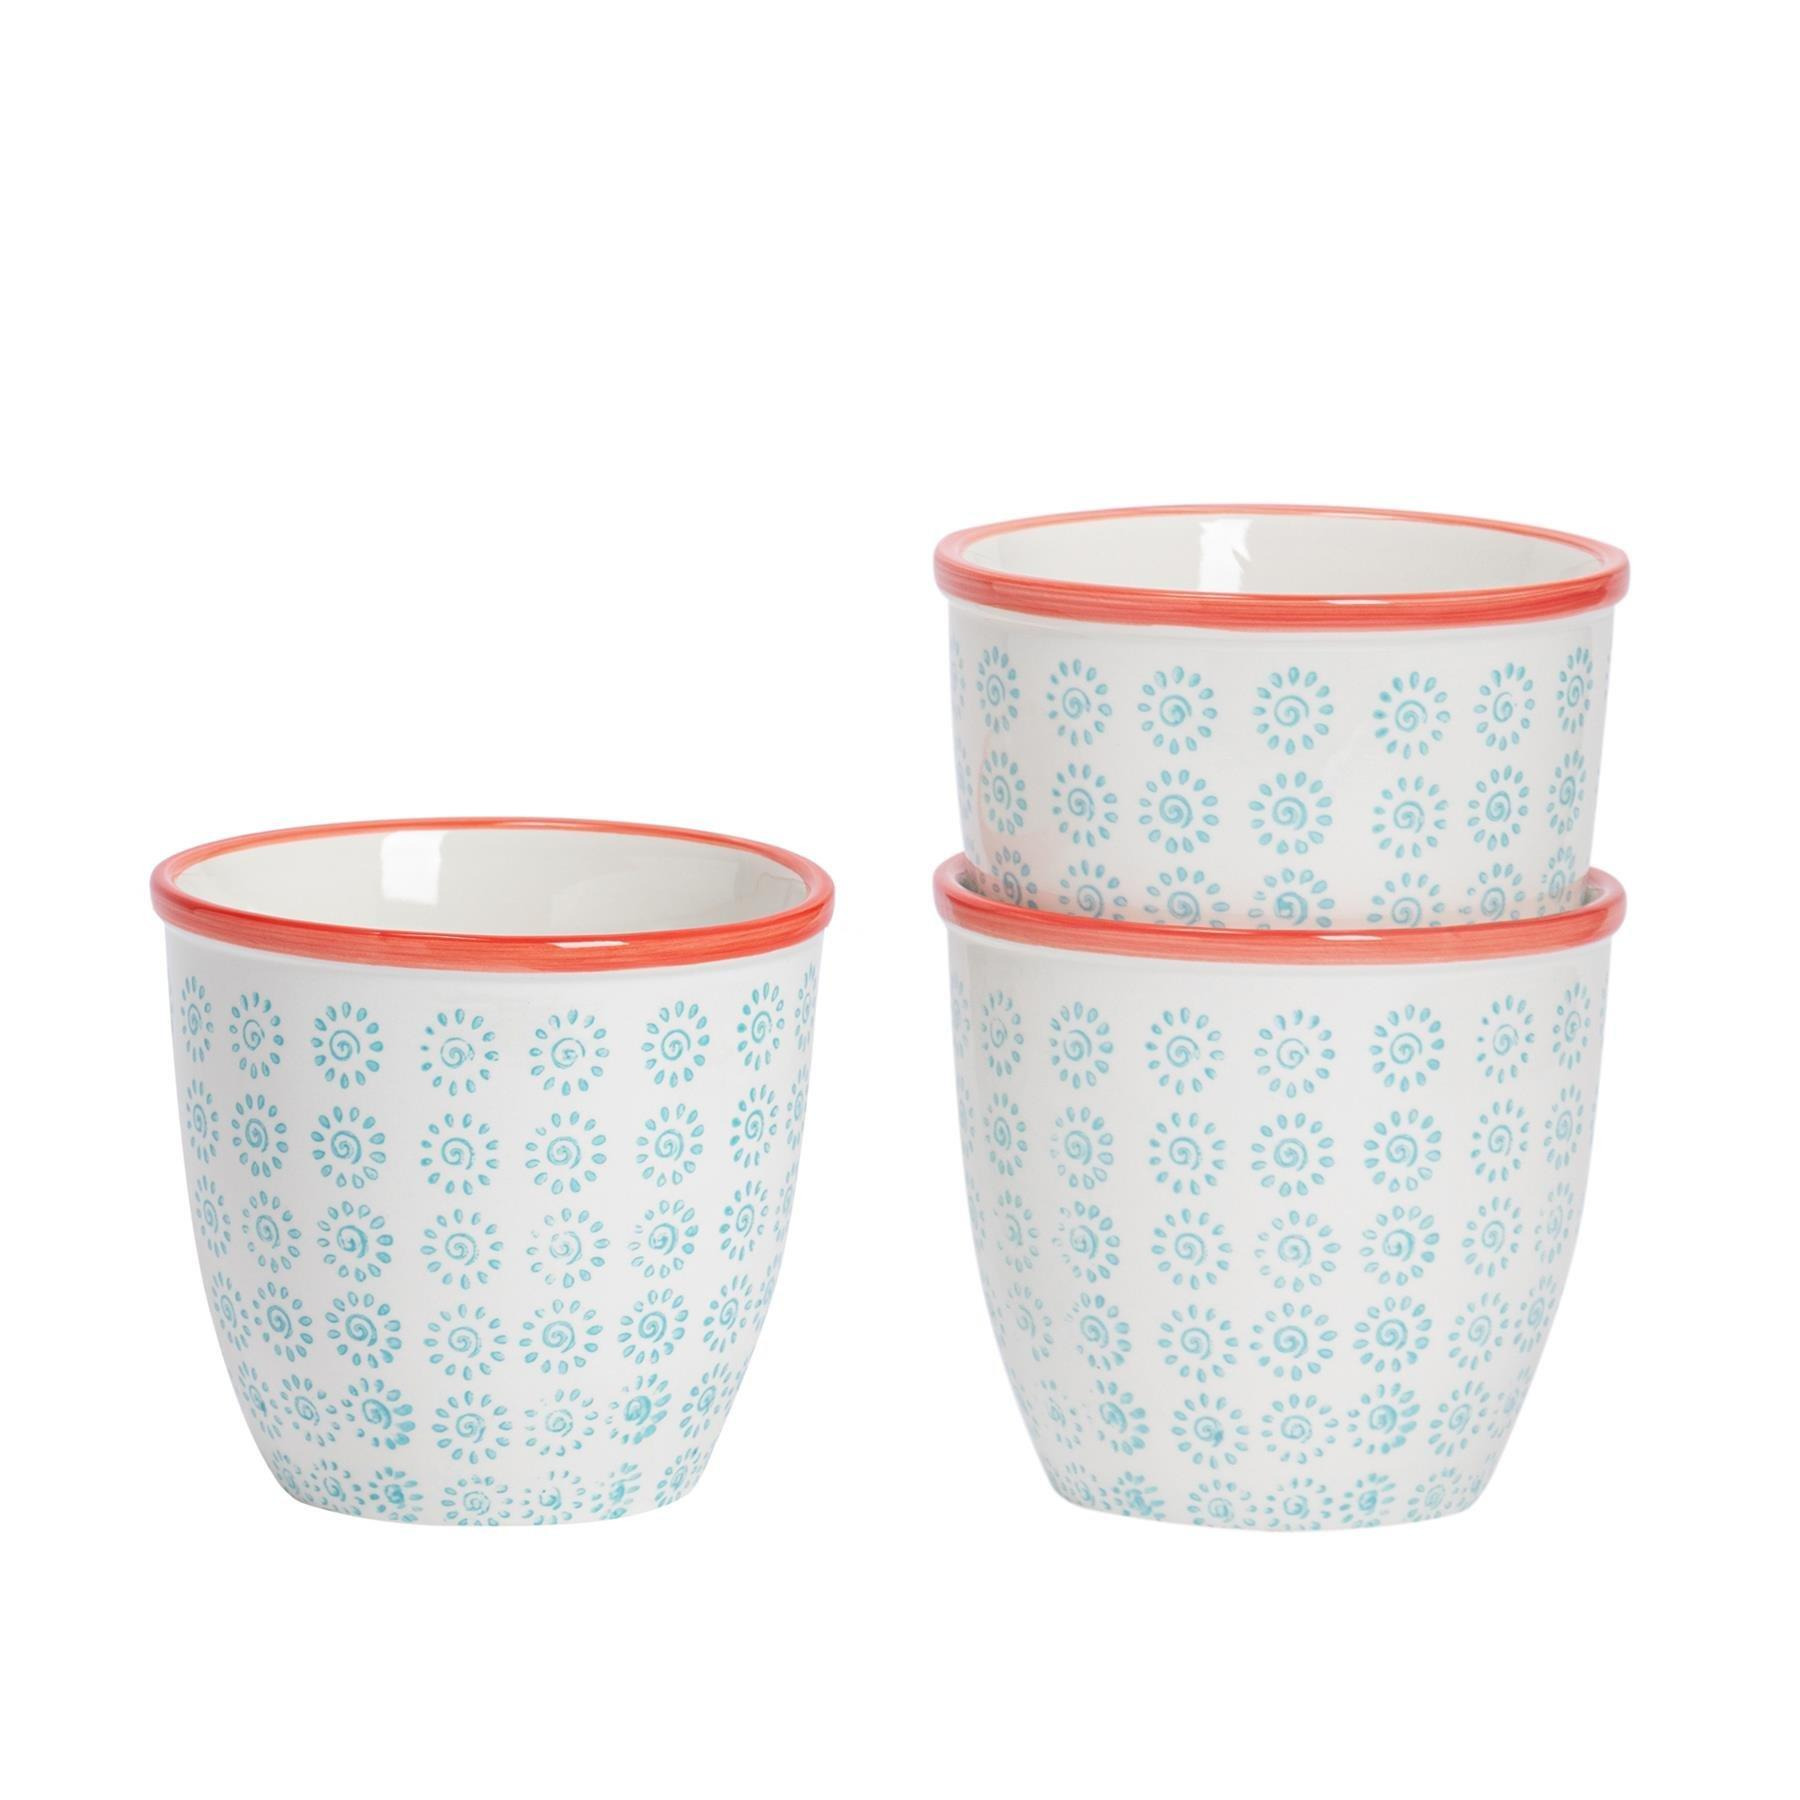 Hand-Printed Plant Pots 14cm Pack of 3 - image 1